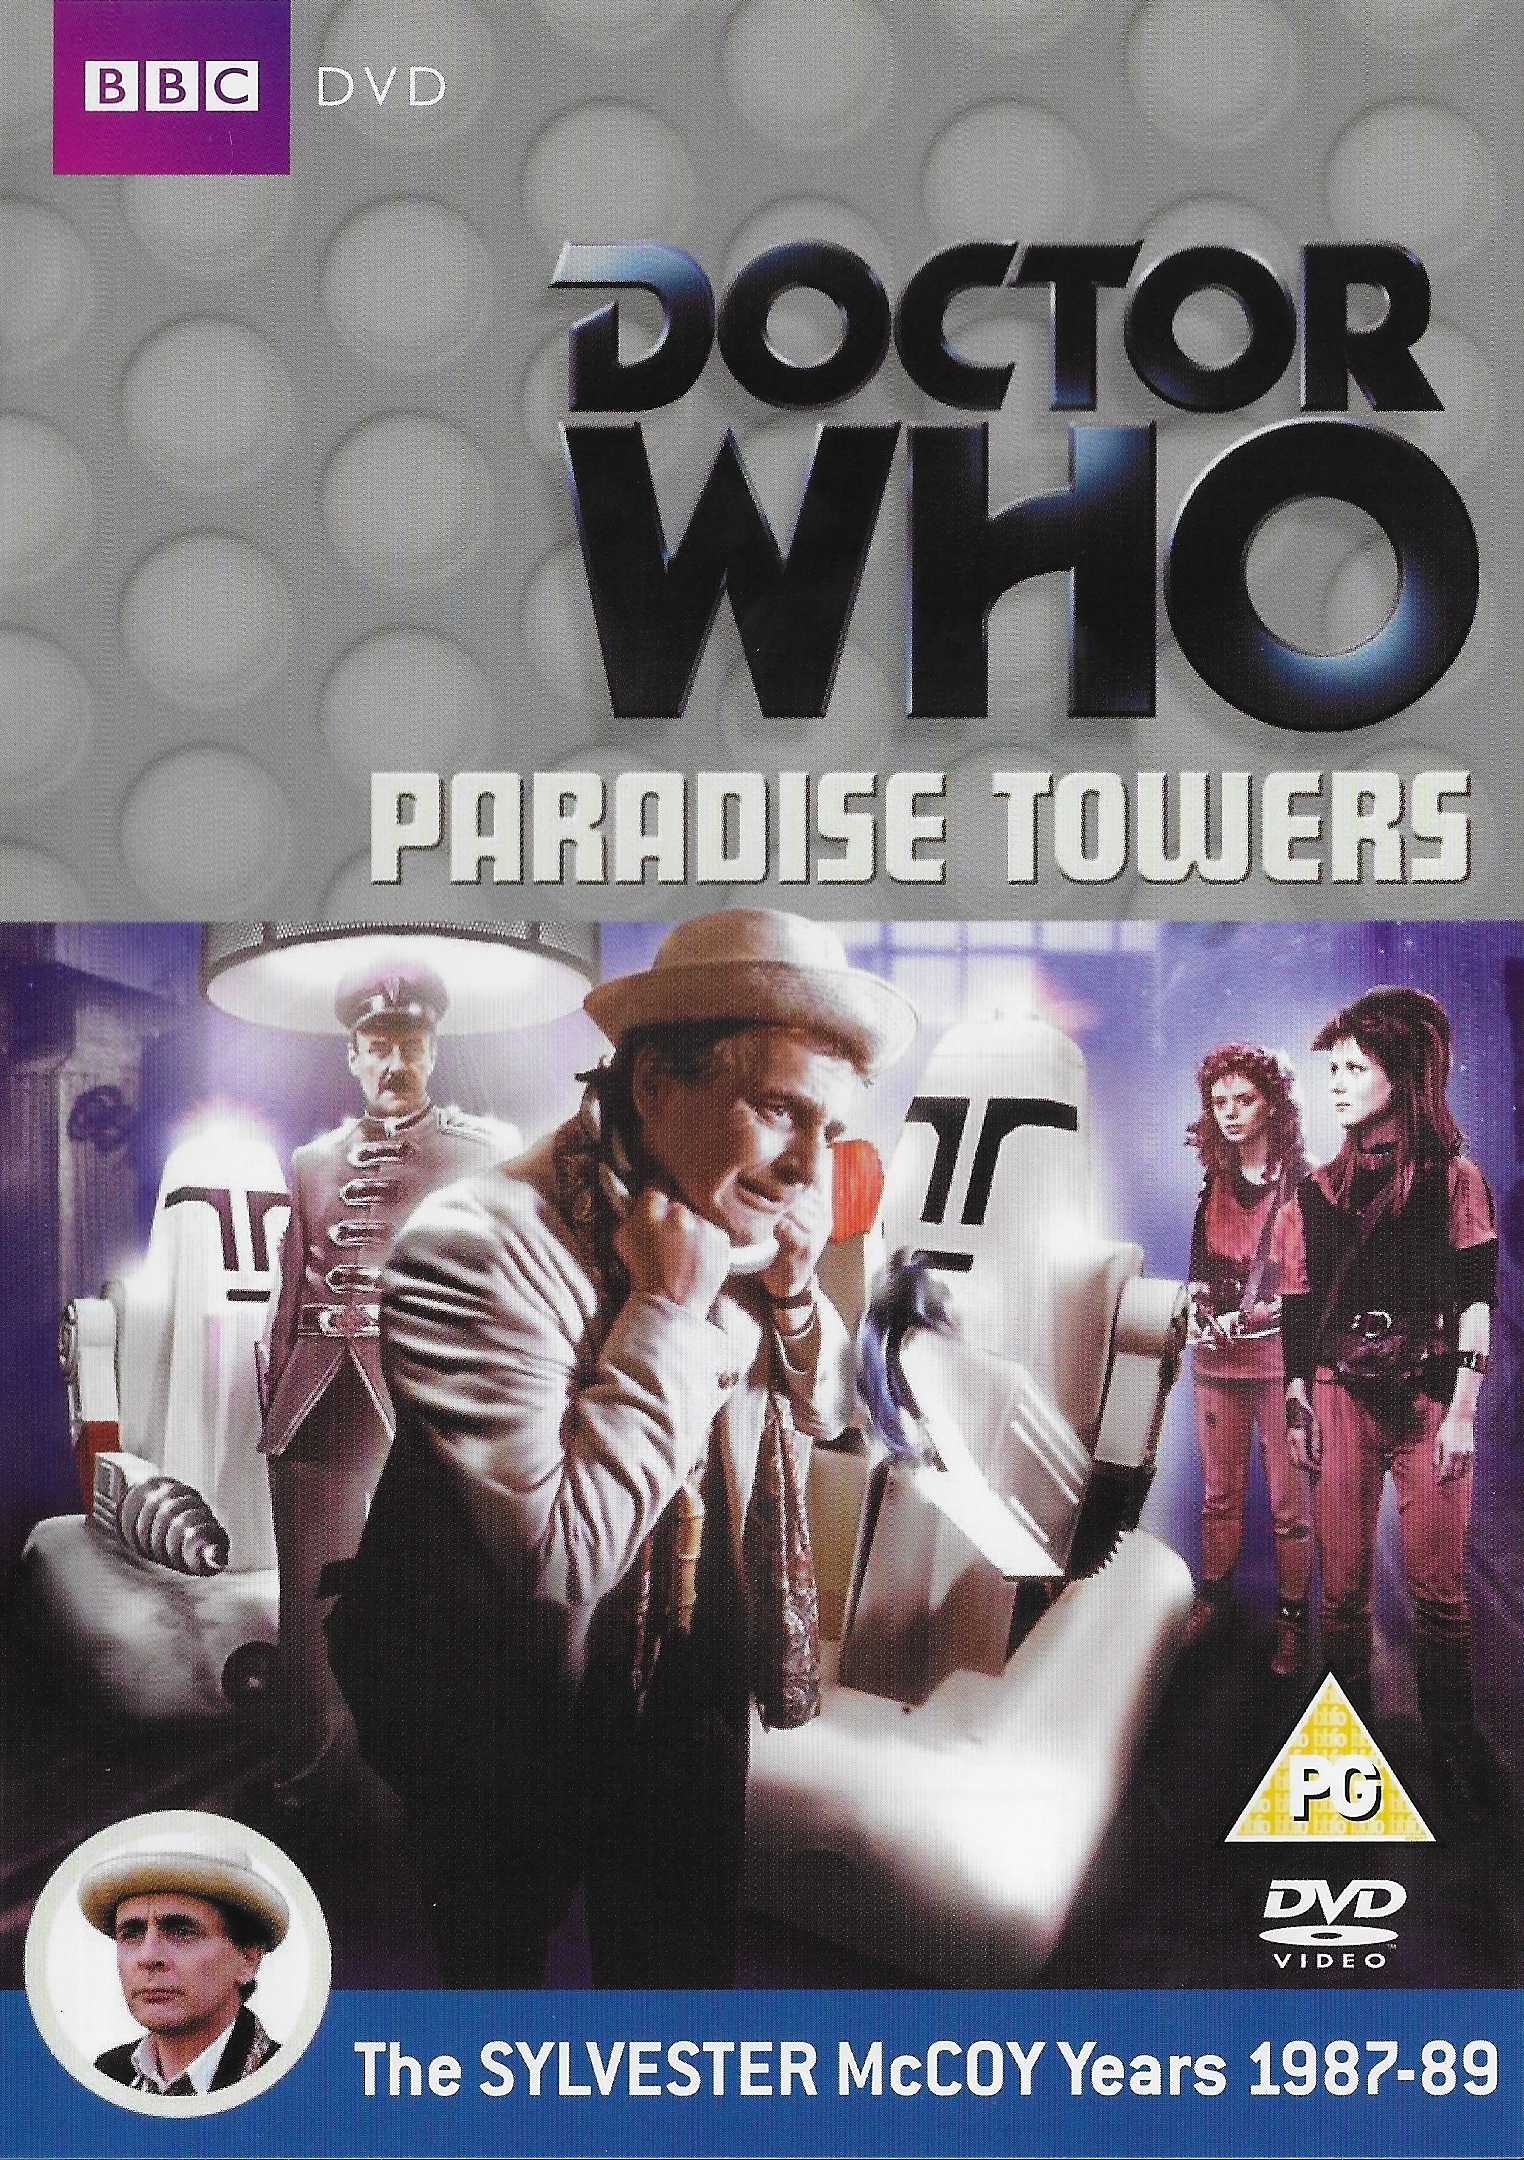 Picture of BBCDVD 3002 Doctor Who - Paradise towers by artist Stephen Wyatt from the BBC dvds - Records and Tapes library